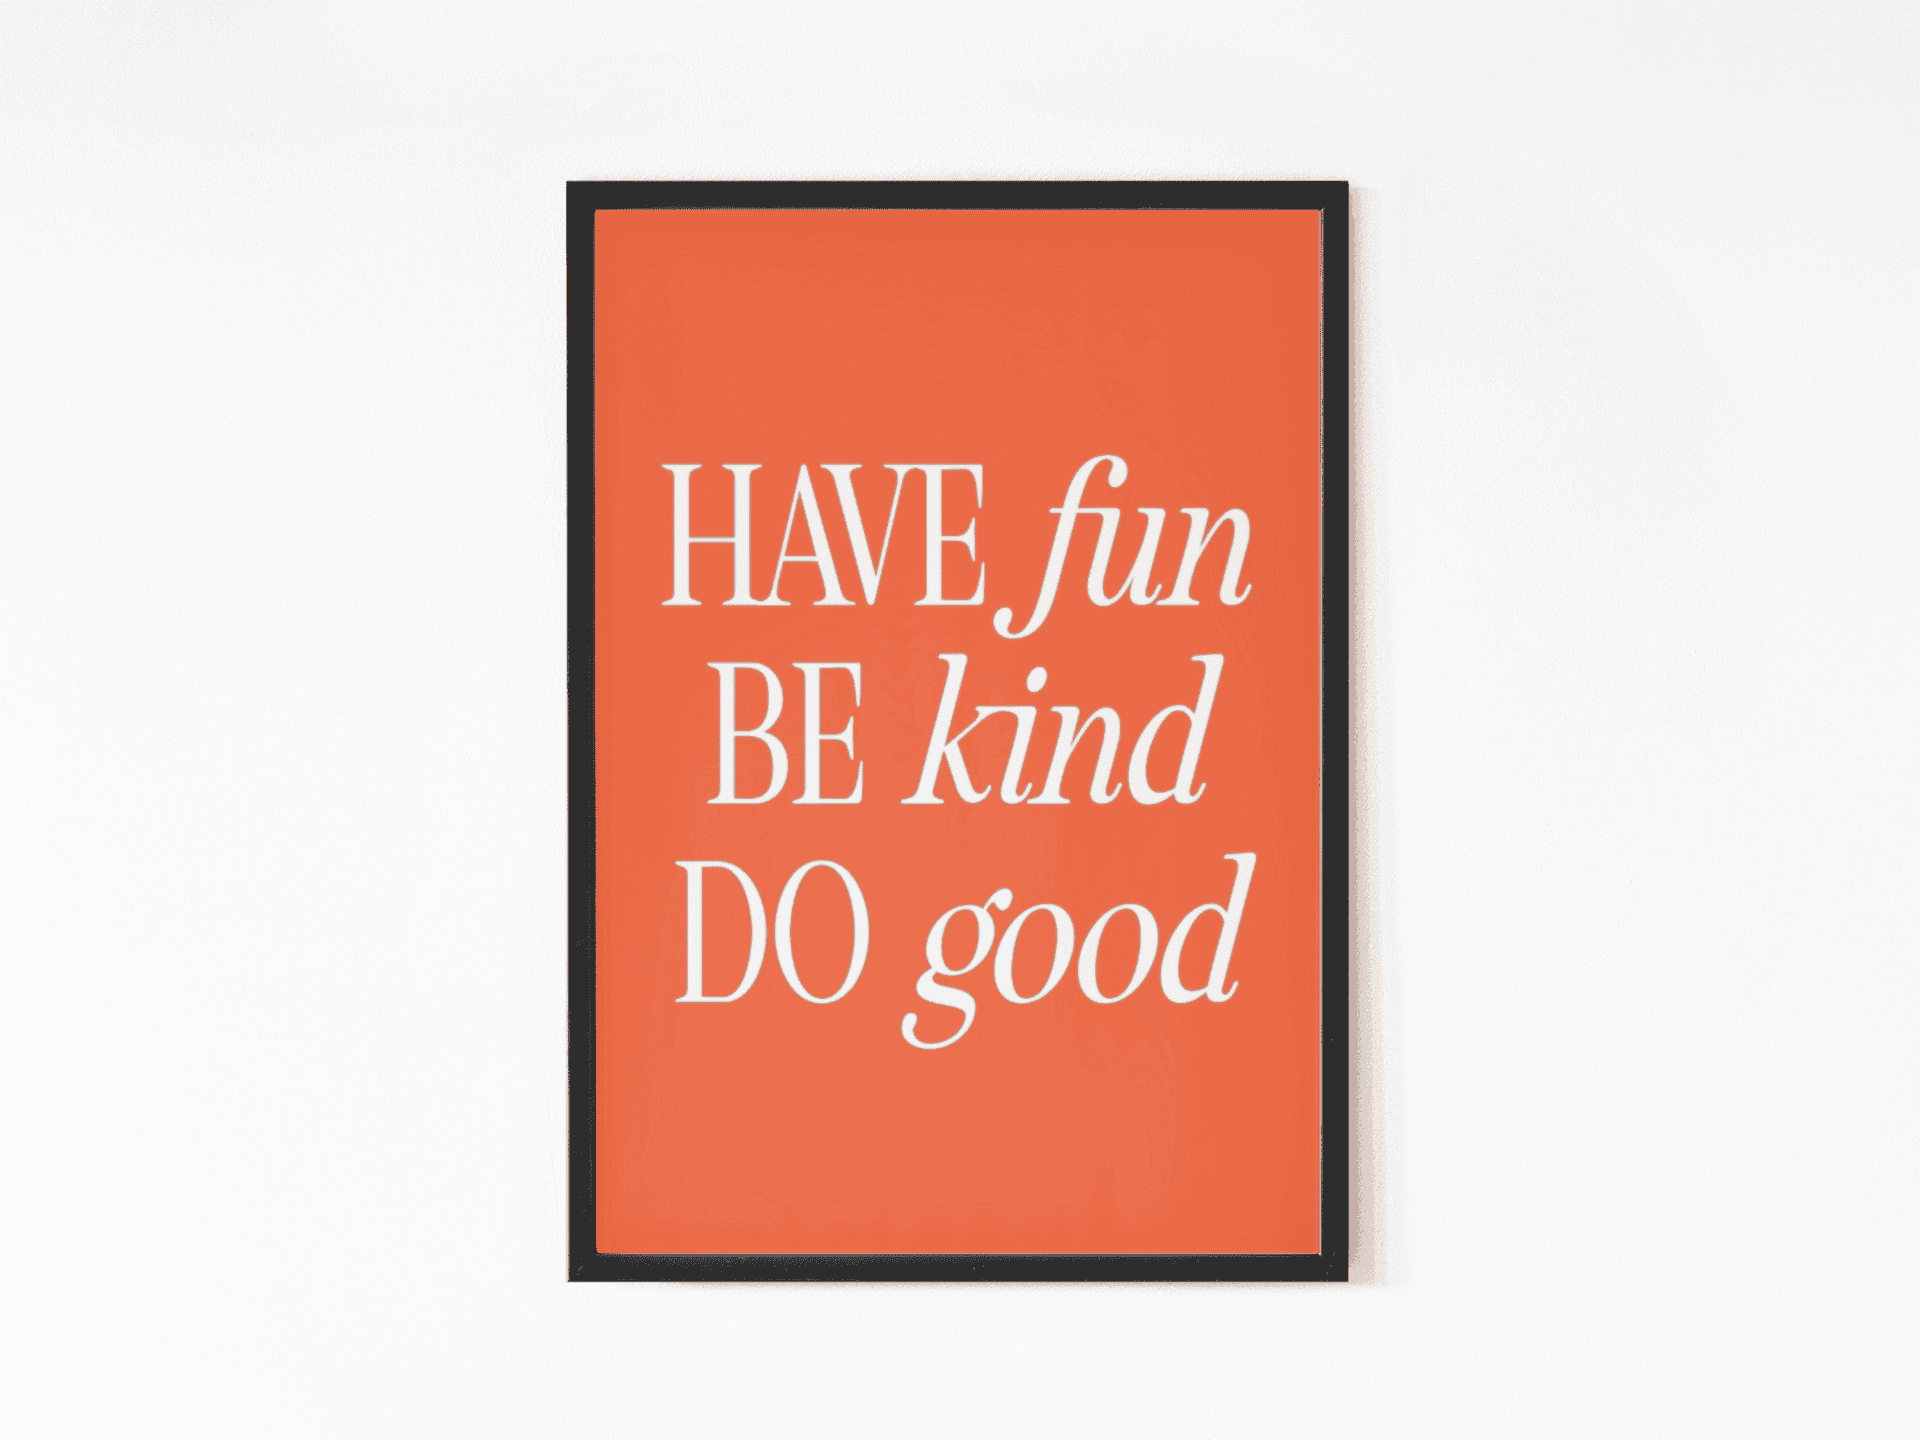 Have fun, kind and good quote wall art